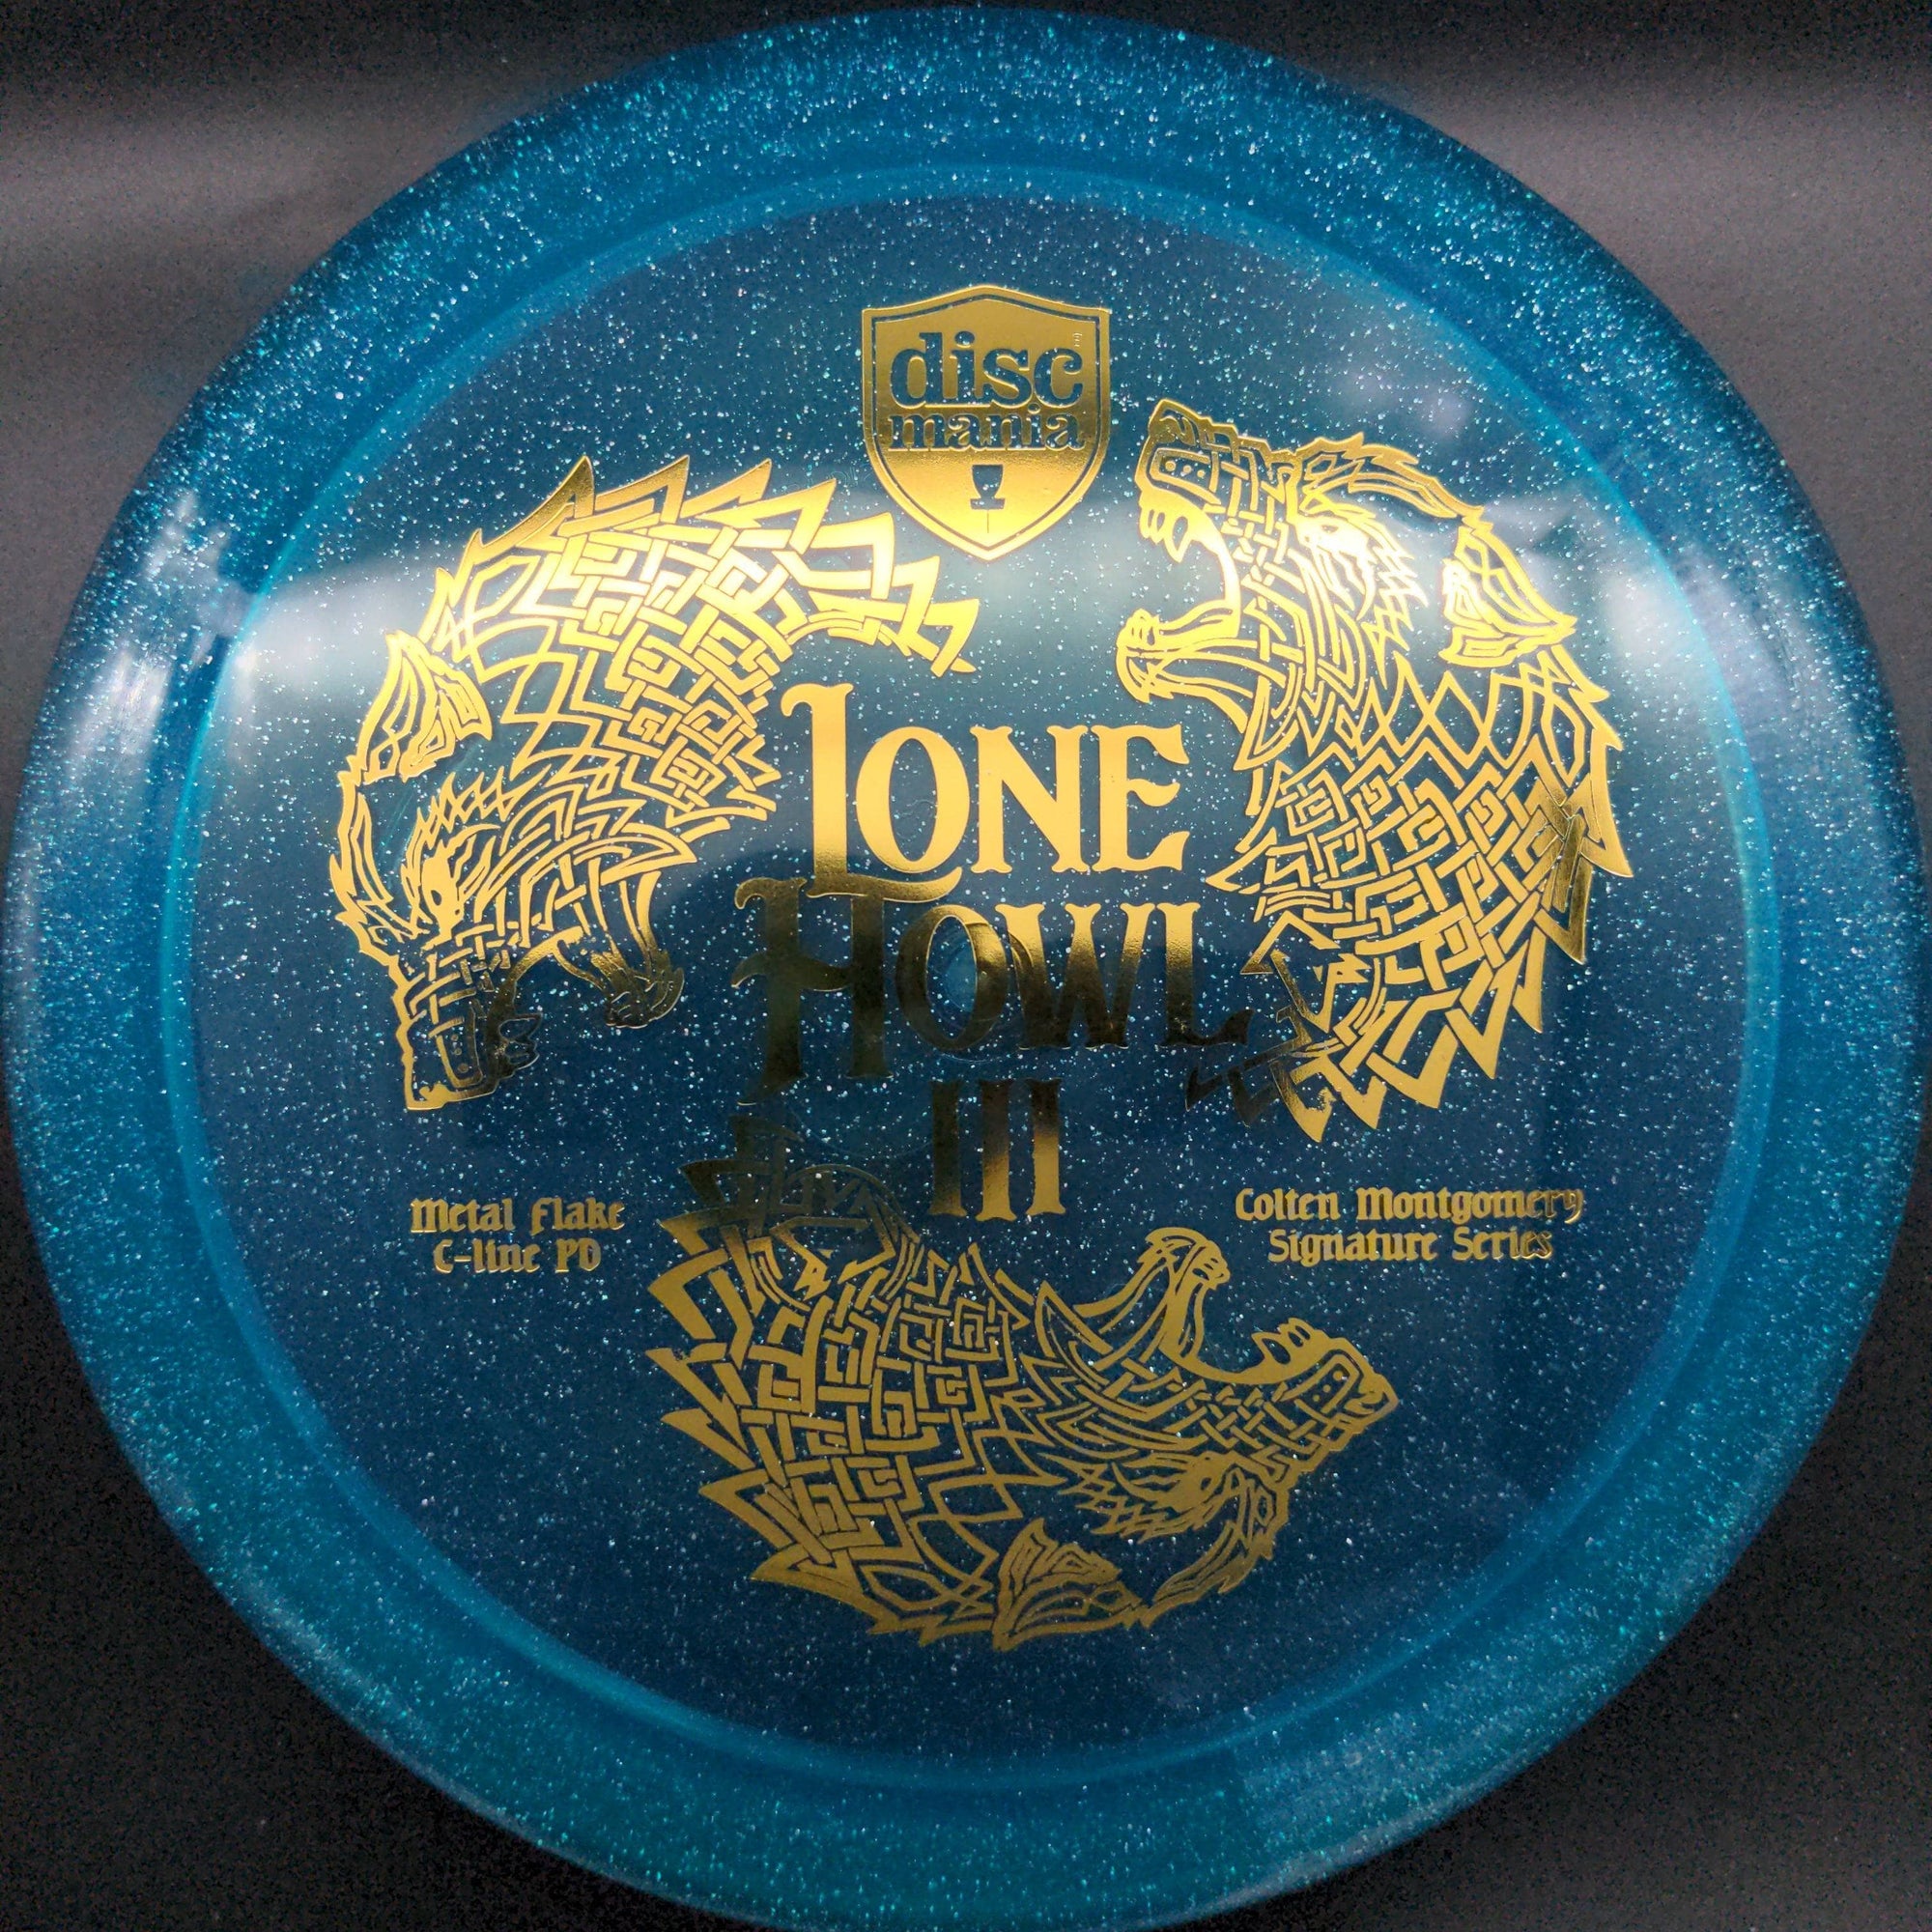 Discmania Distance Driver Blue Gold Stamp 173g Tour Series Colten Montgomery Lone Howl 3, Metal Flake C-line PD